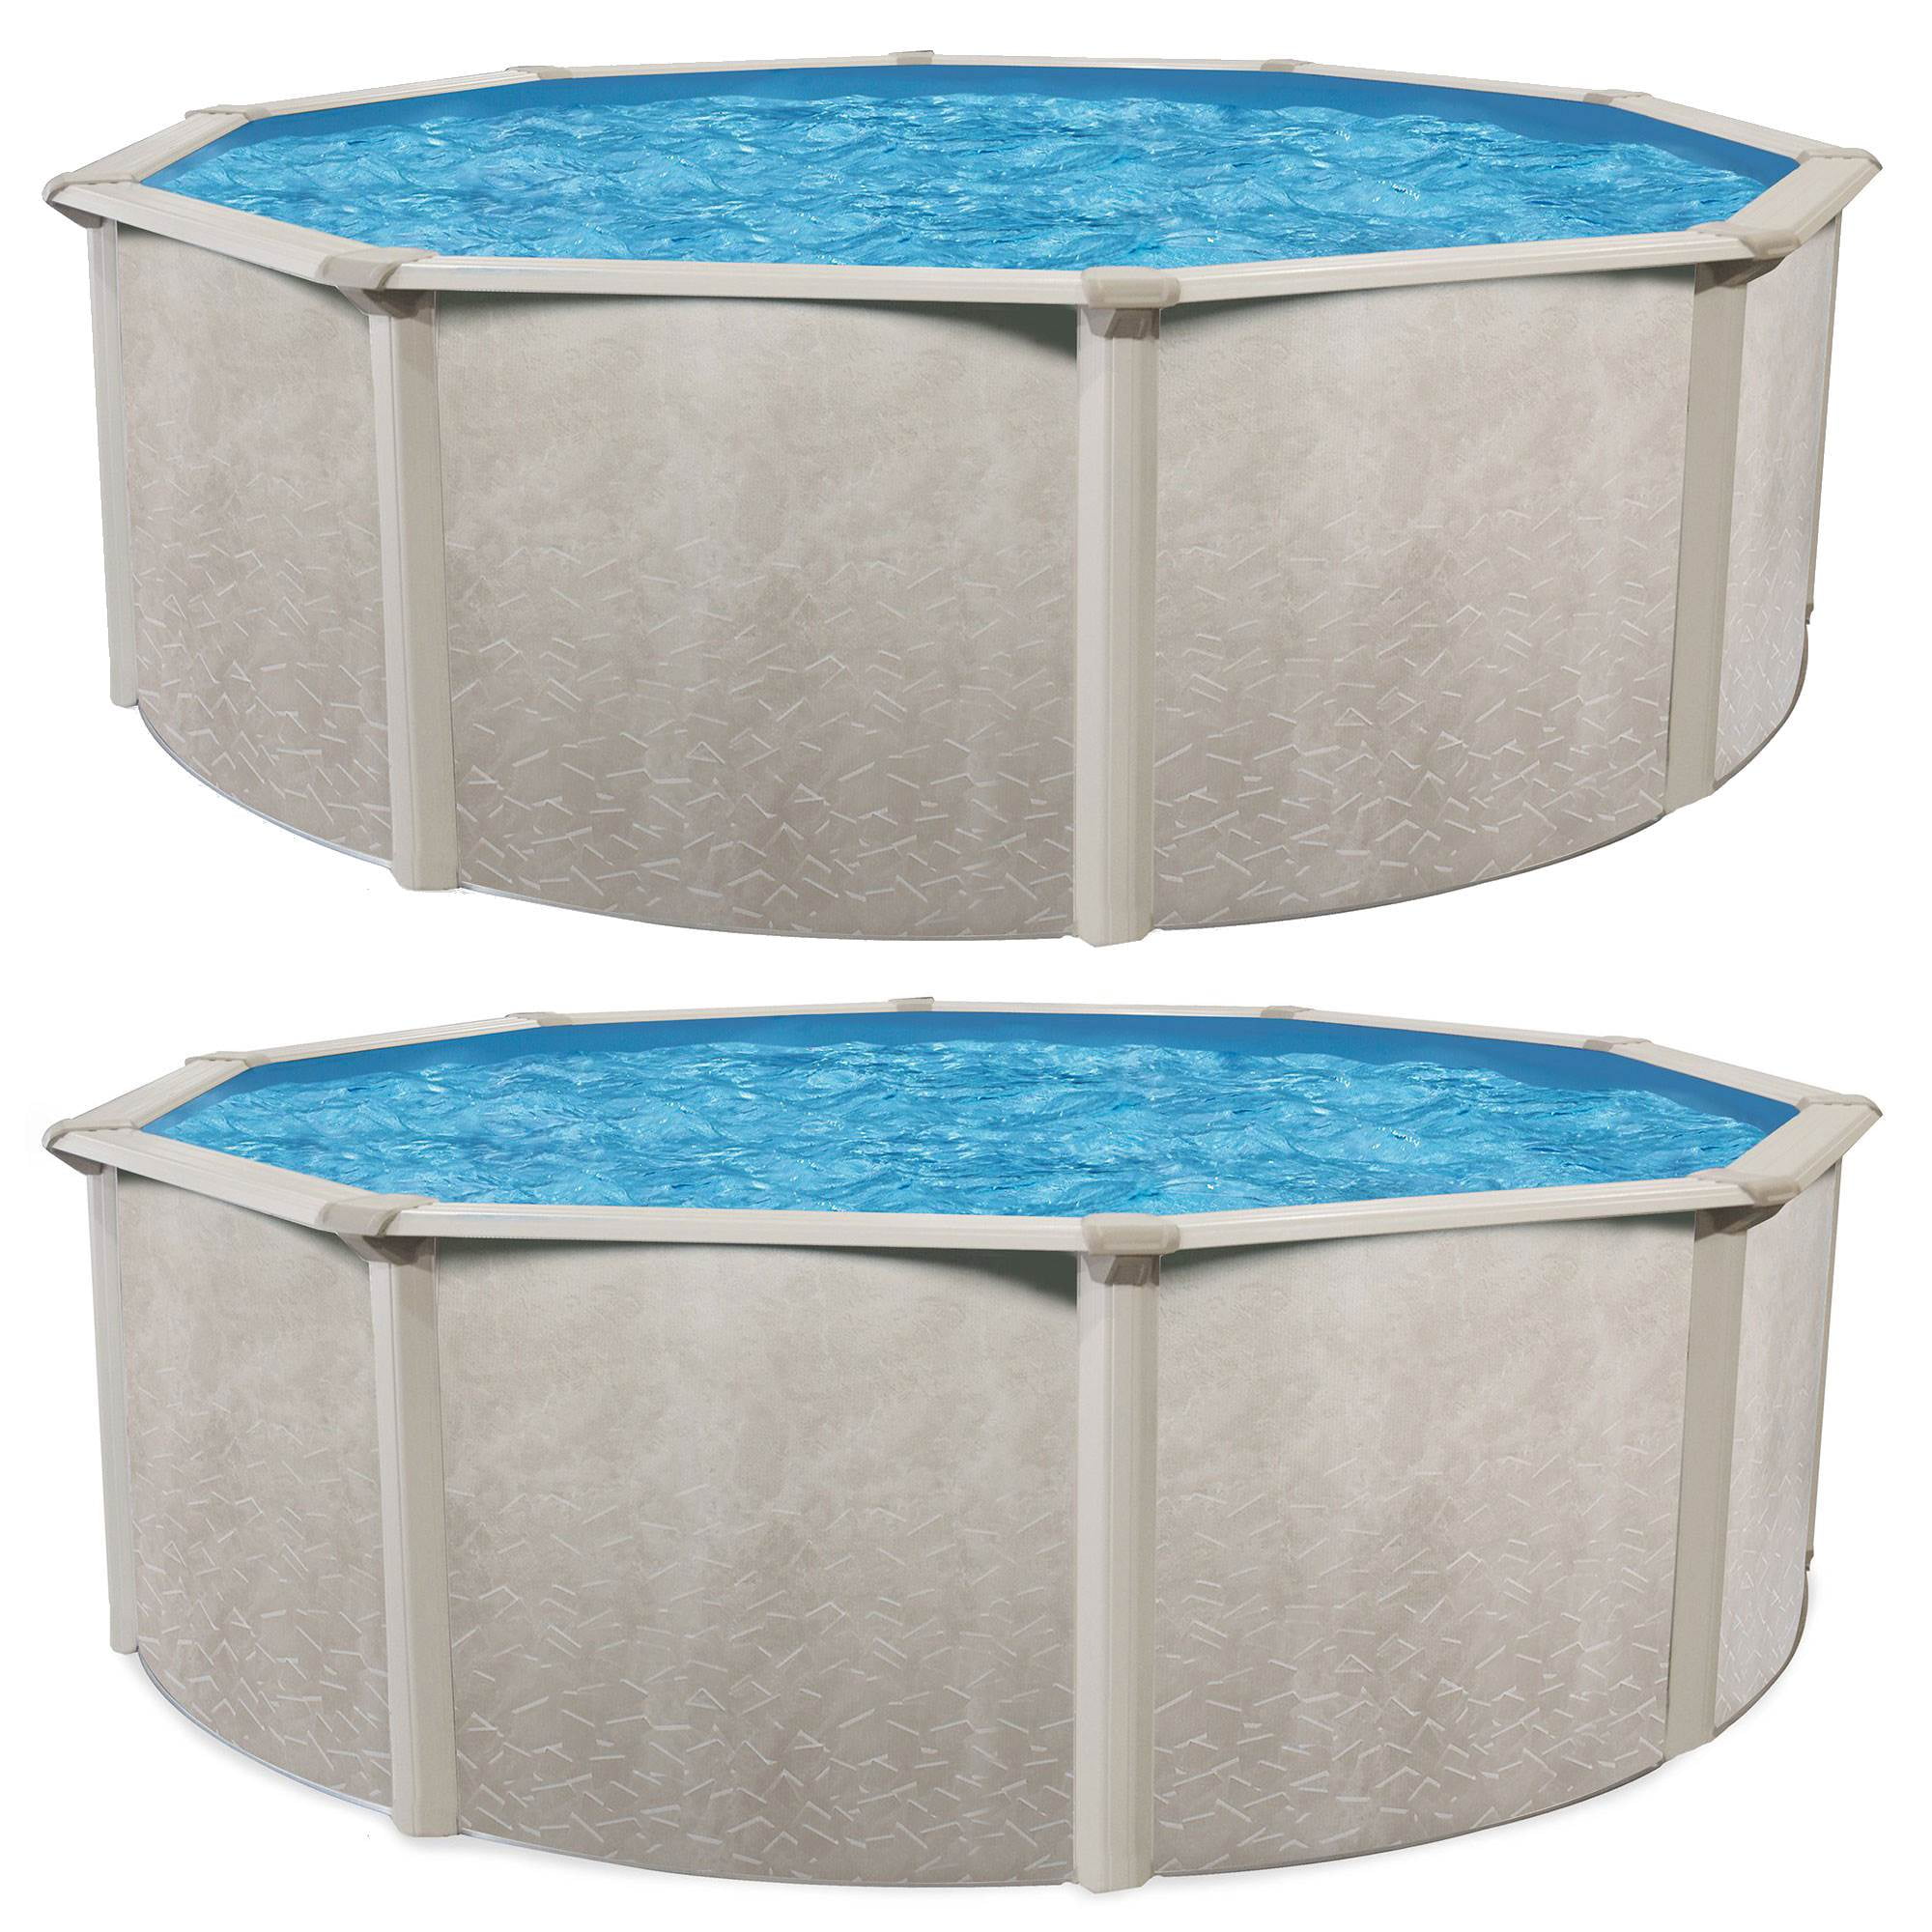 Details about   Lomart Skye Harbor 16 Foot Round Hard Side Steel Frame Swimming Pool Package 